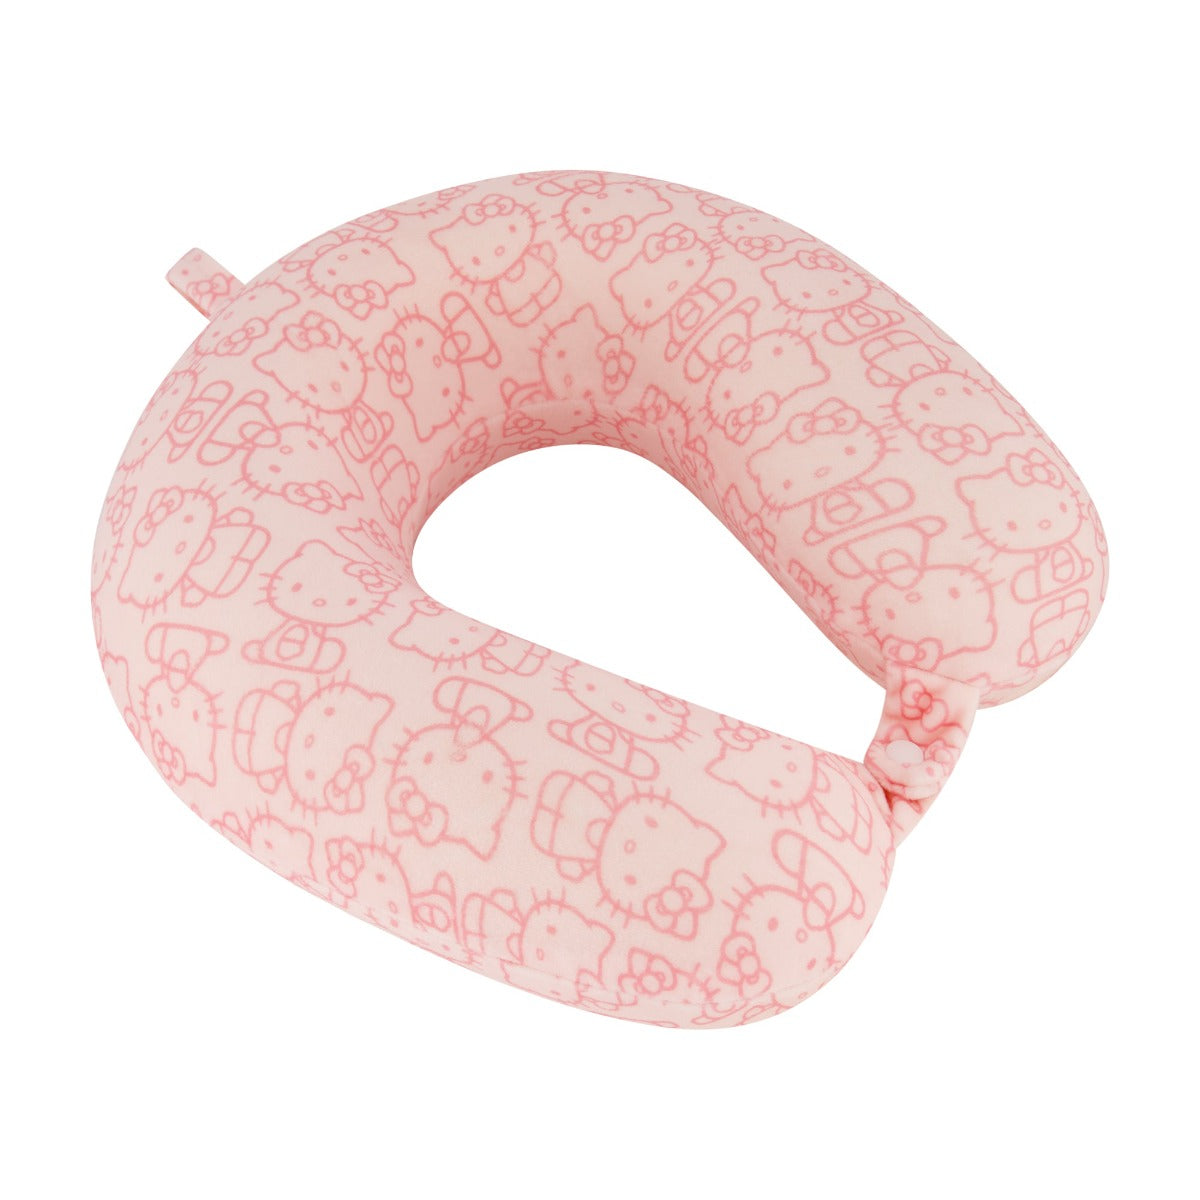 Pink Ful Hello Kitty All over icon memory foam travel pillow - best neck pillows for traveling